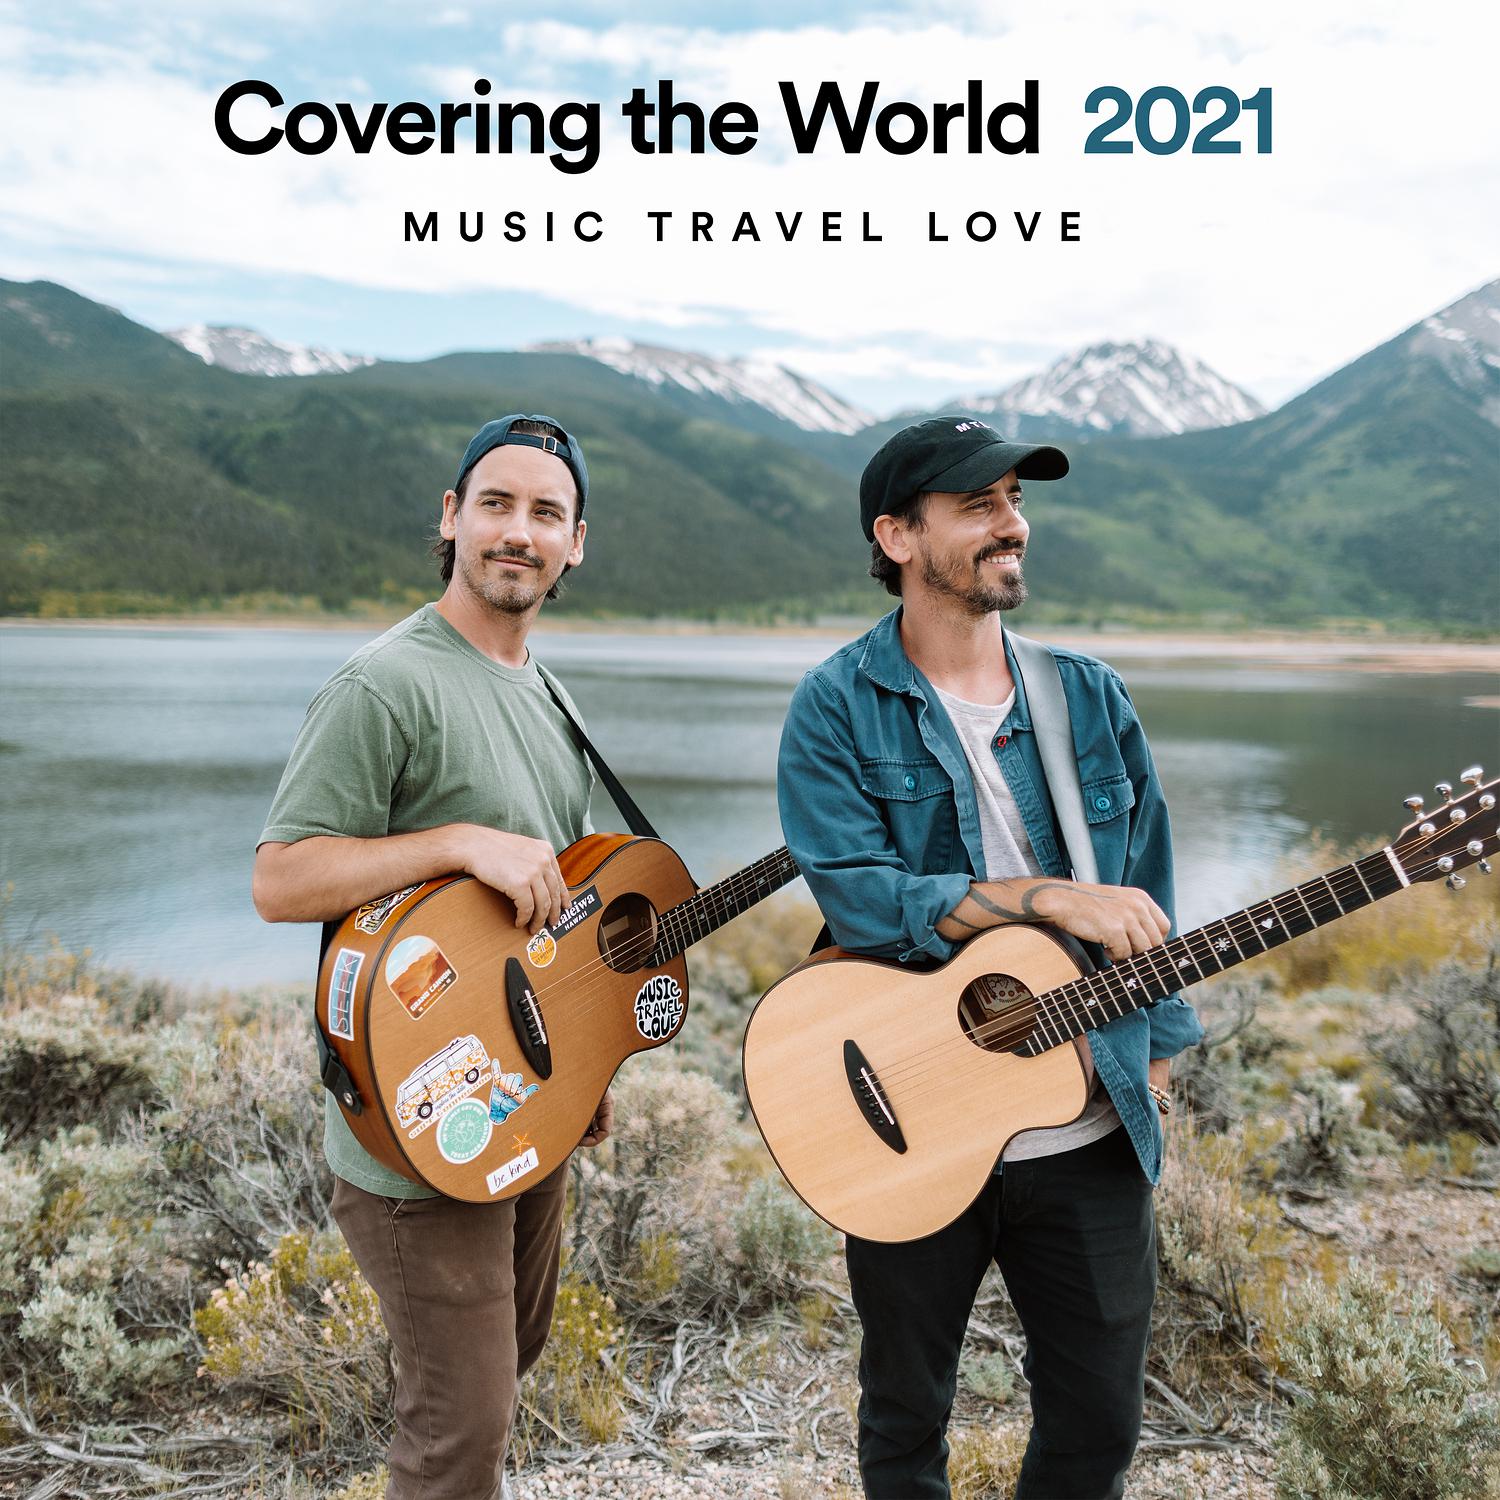 Music Travel Love - How Deep Is Your Love